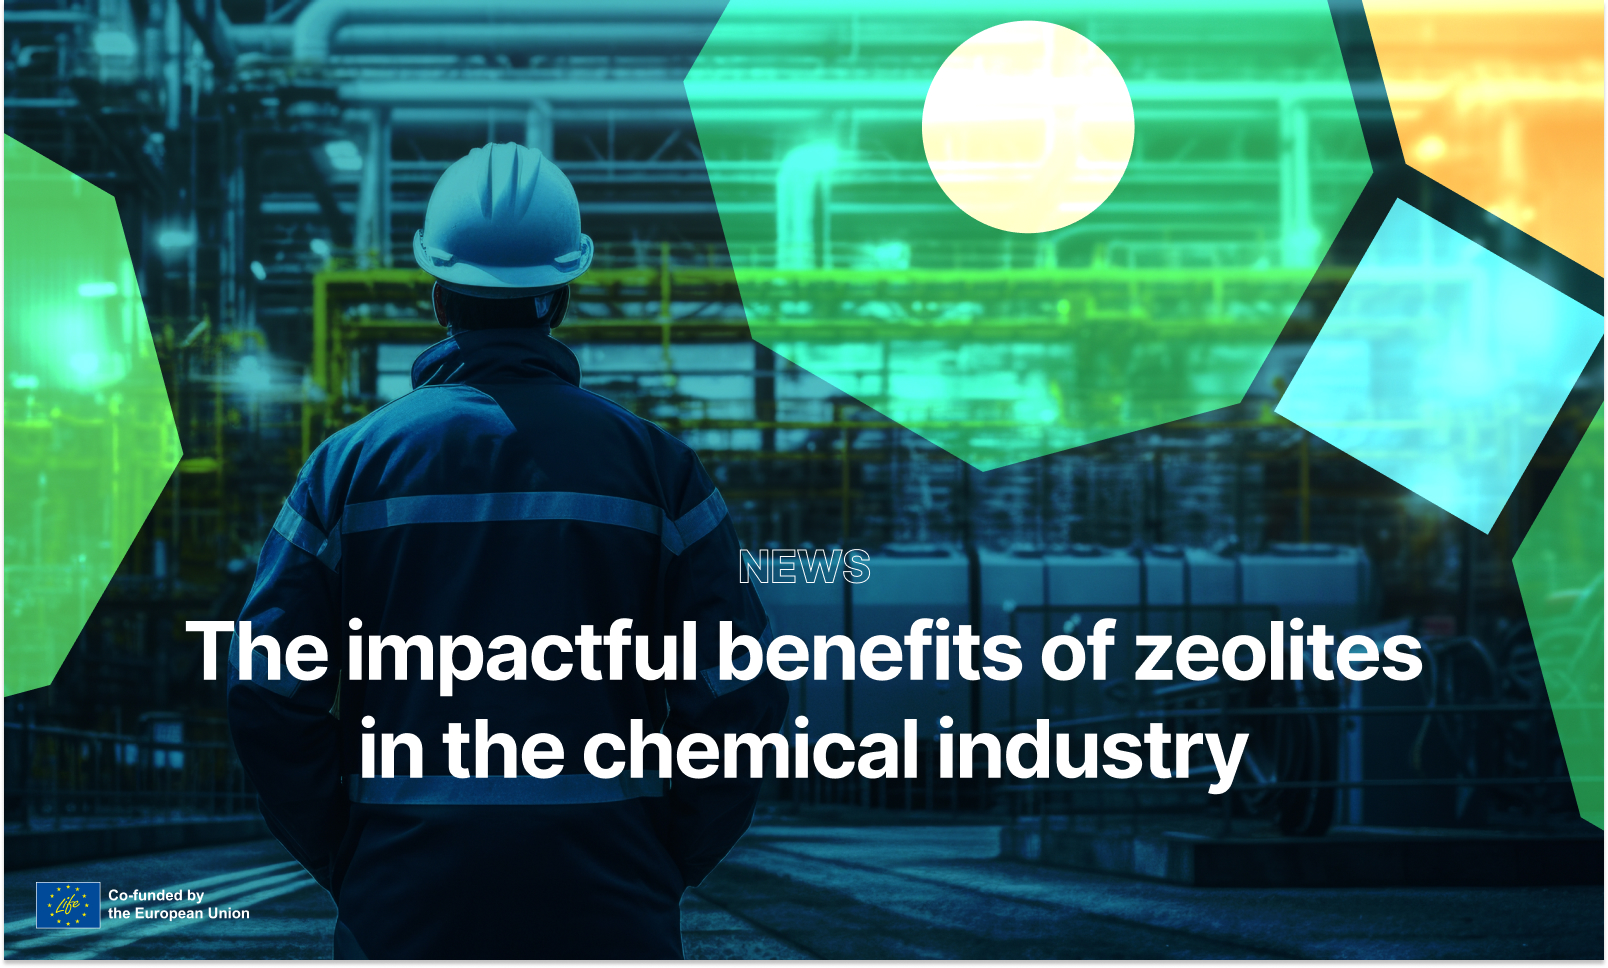 The impactful benefits of zeolites in the chemical industry - news banner